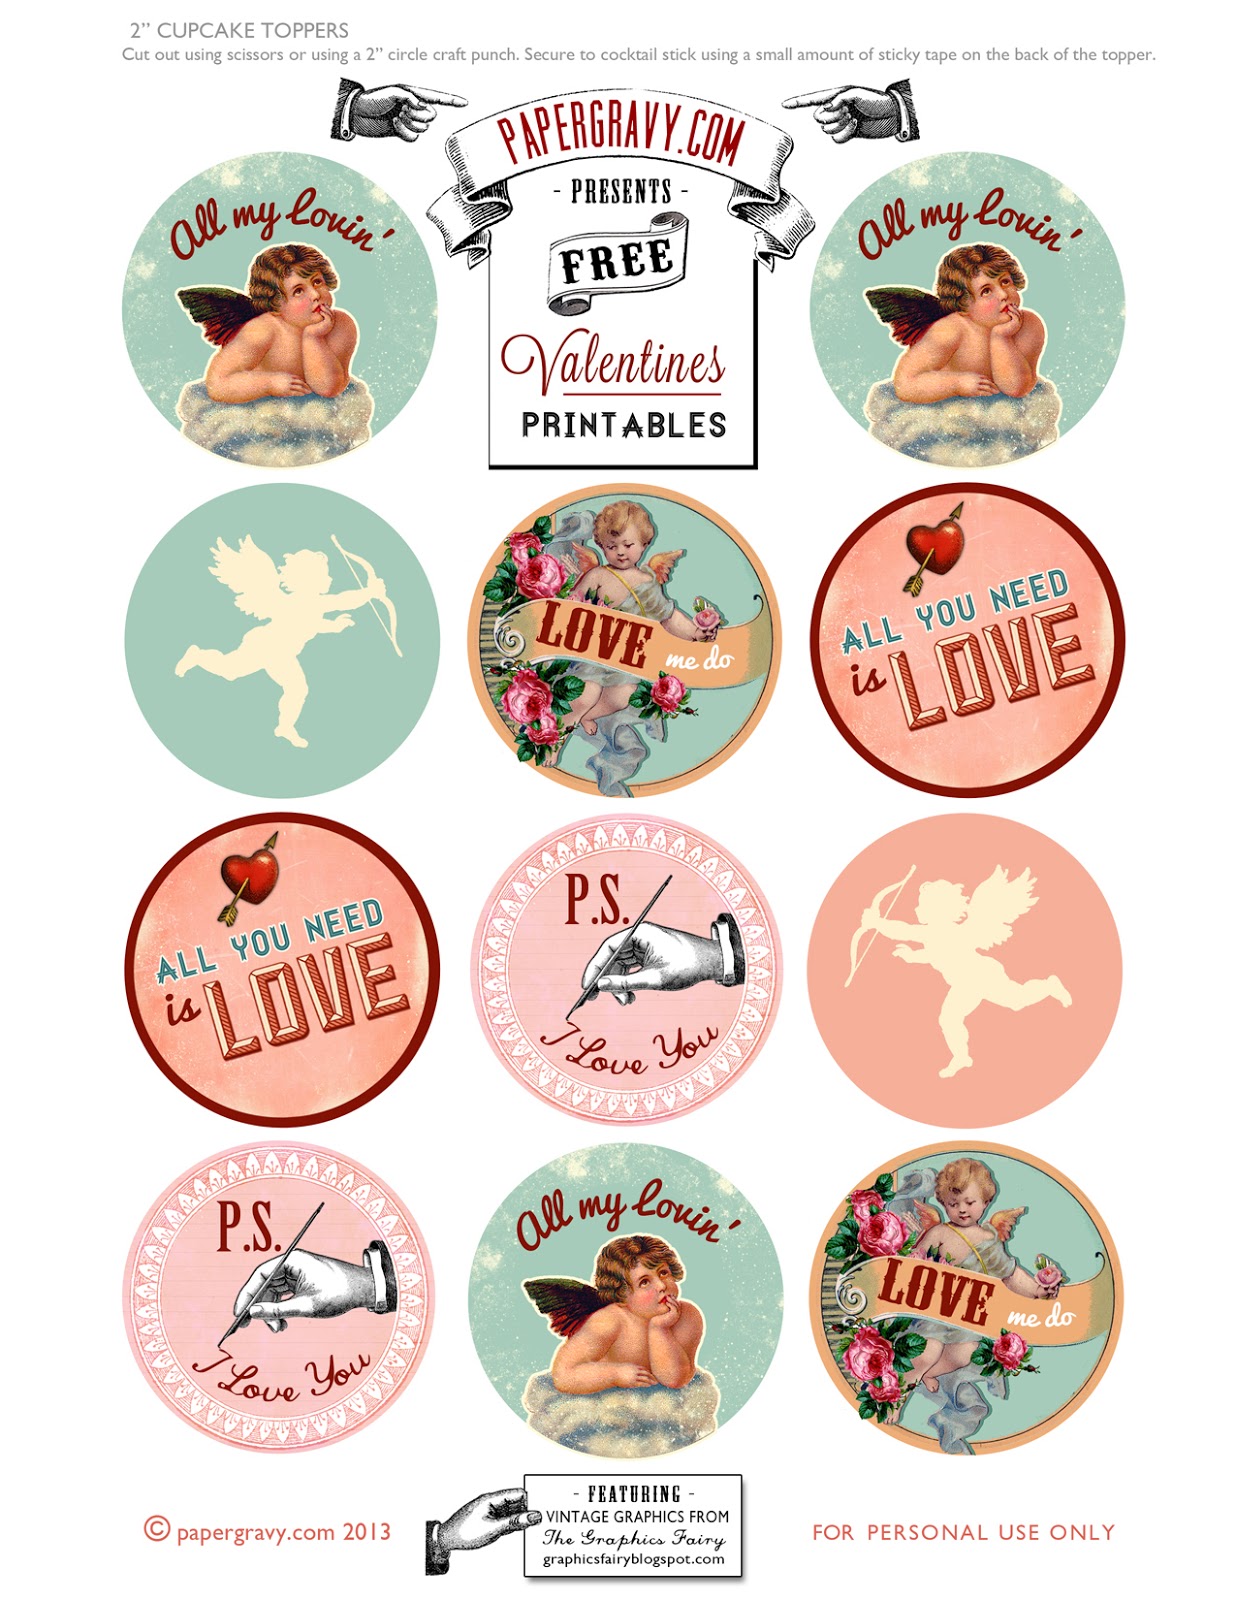 Valentine's Cupcake Toppers Printables